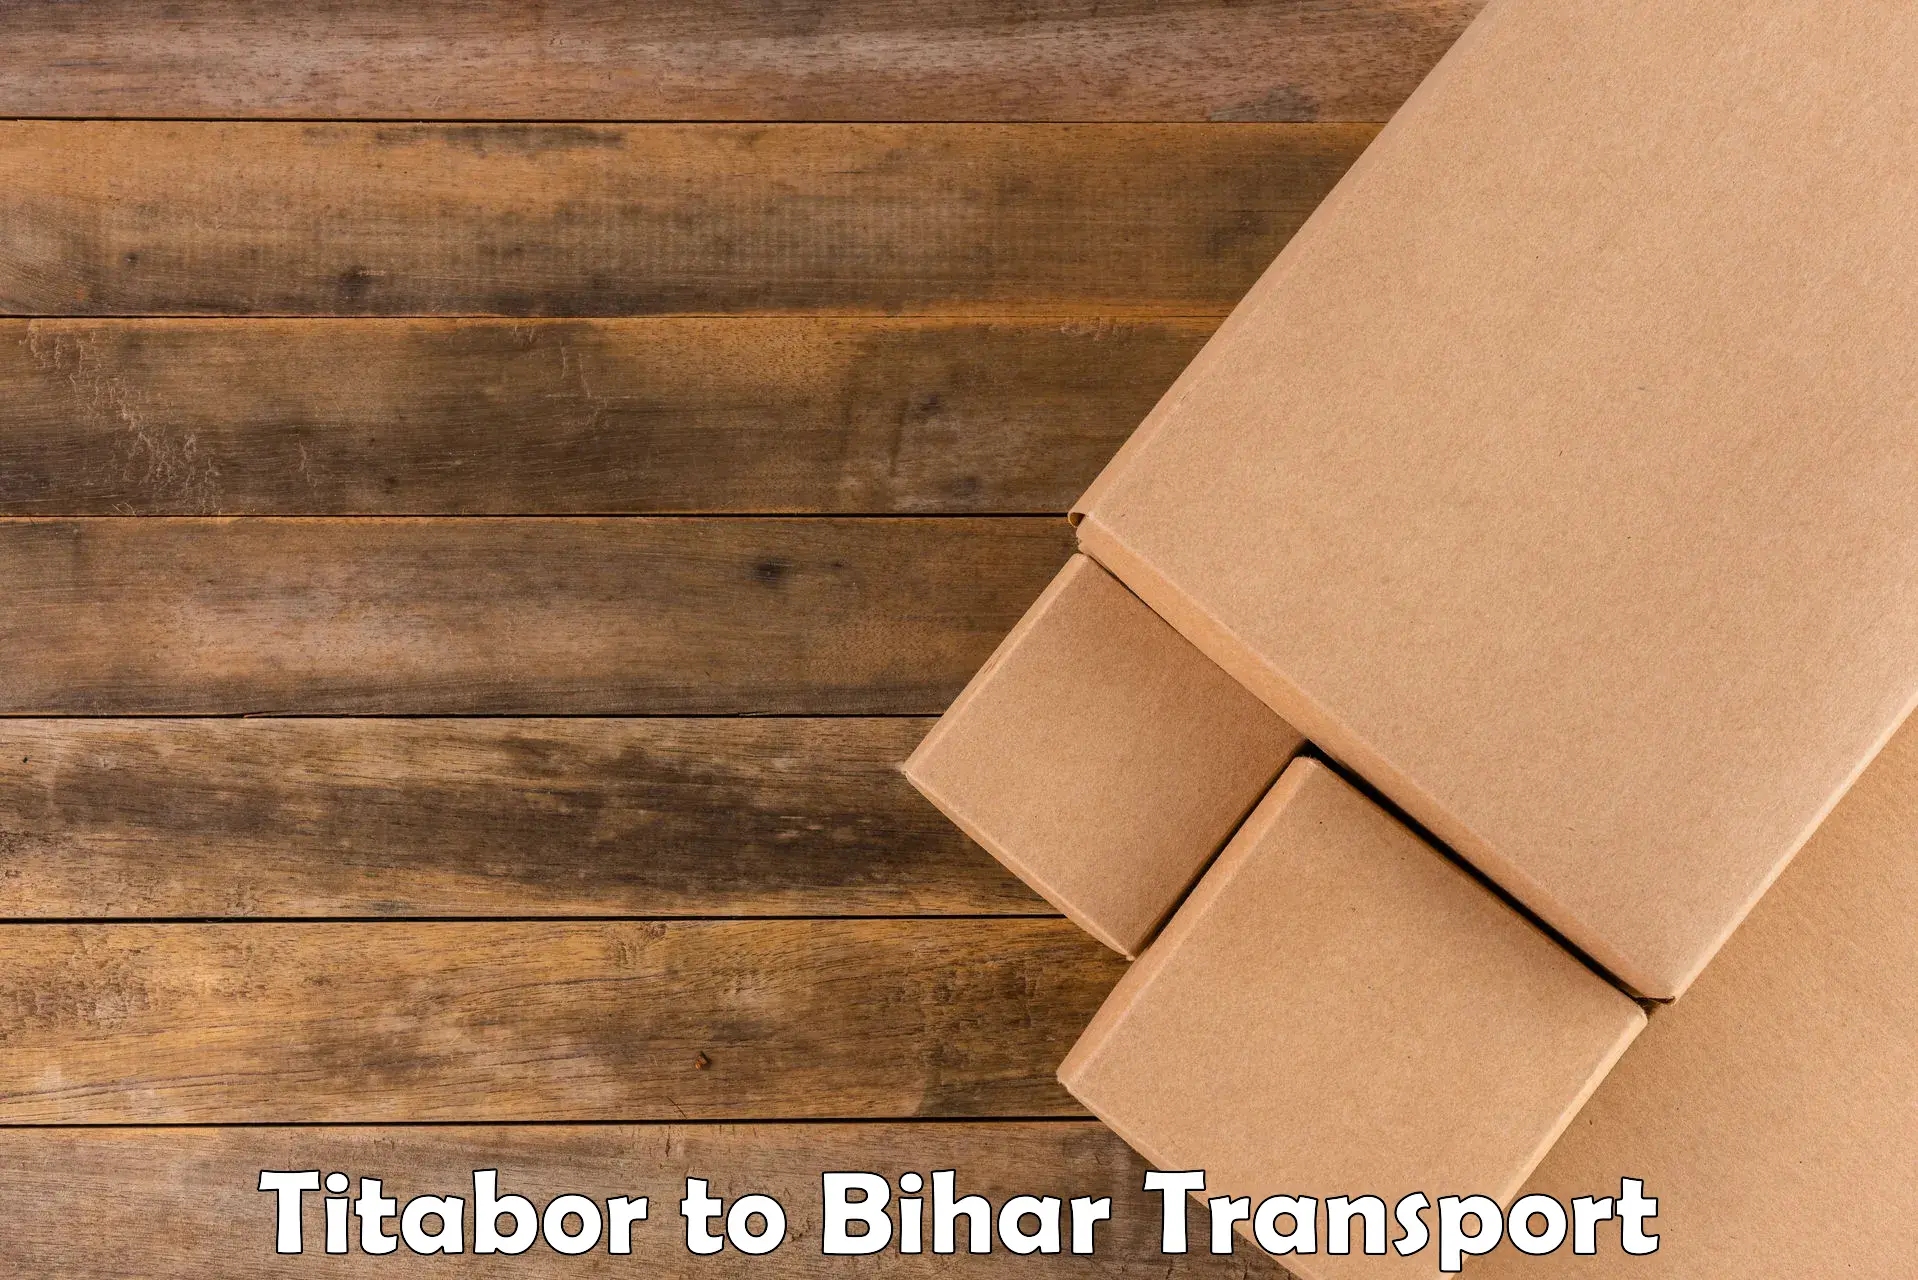 Nearby transport service Titabor to Bhojpur